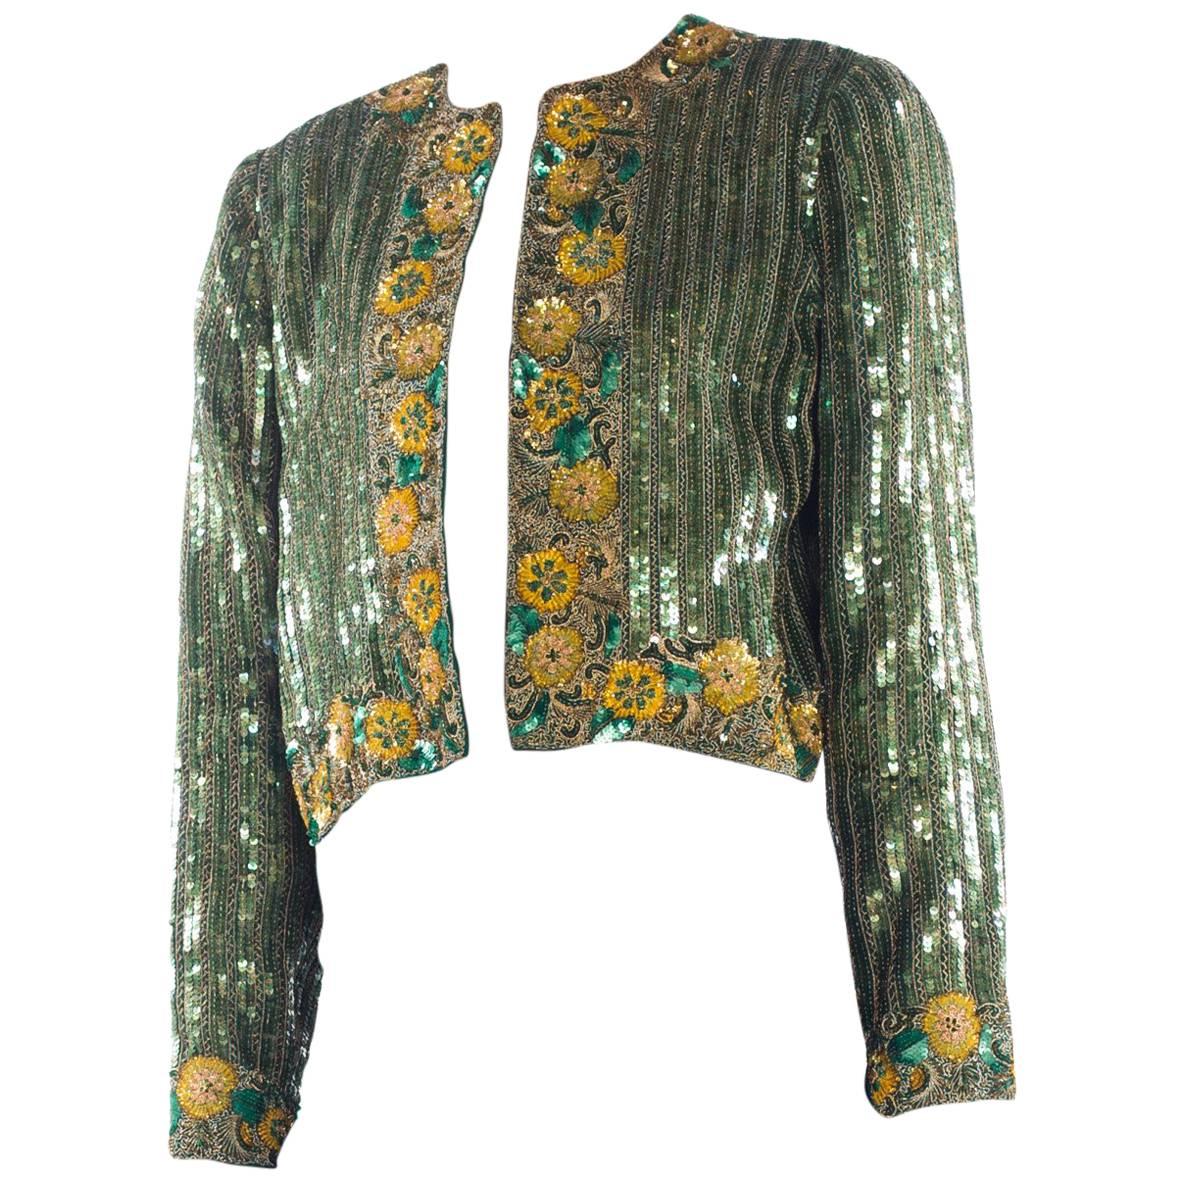 1980S RICHILENE Emerald Green Silk Jacket Beaded With Gold Flowers & Embroidery